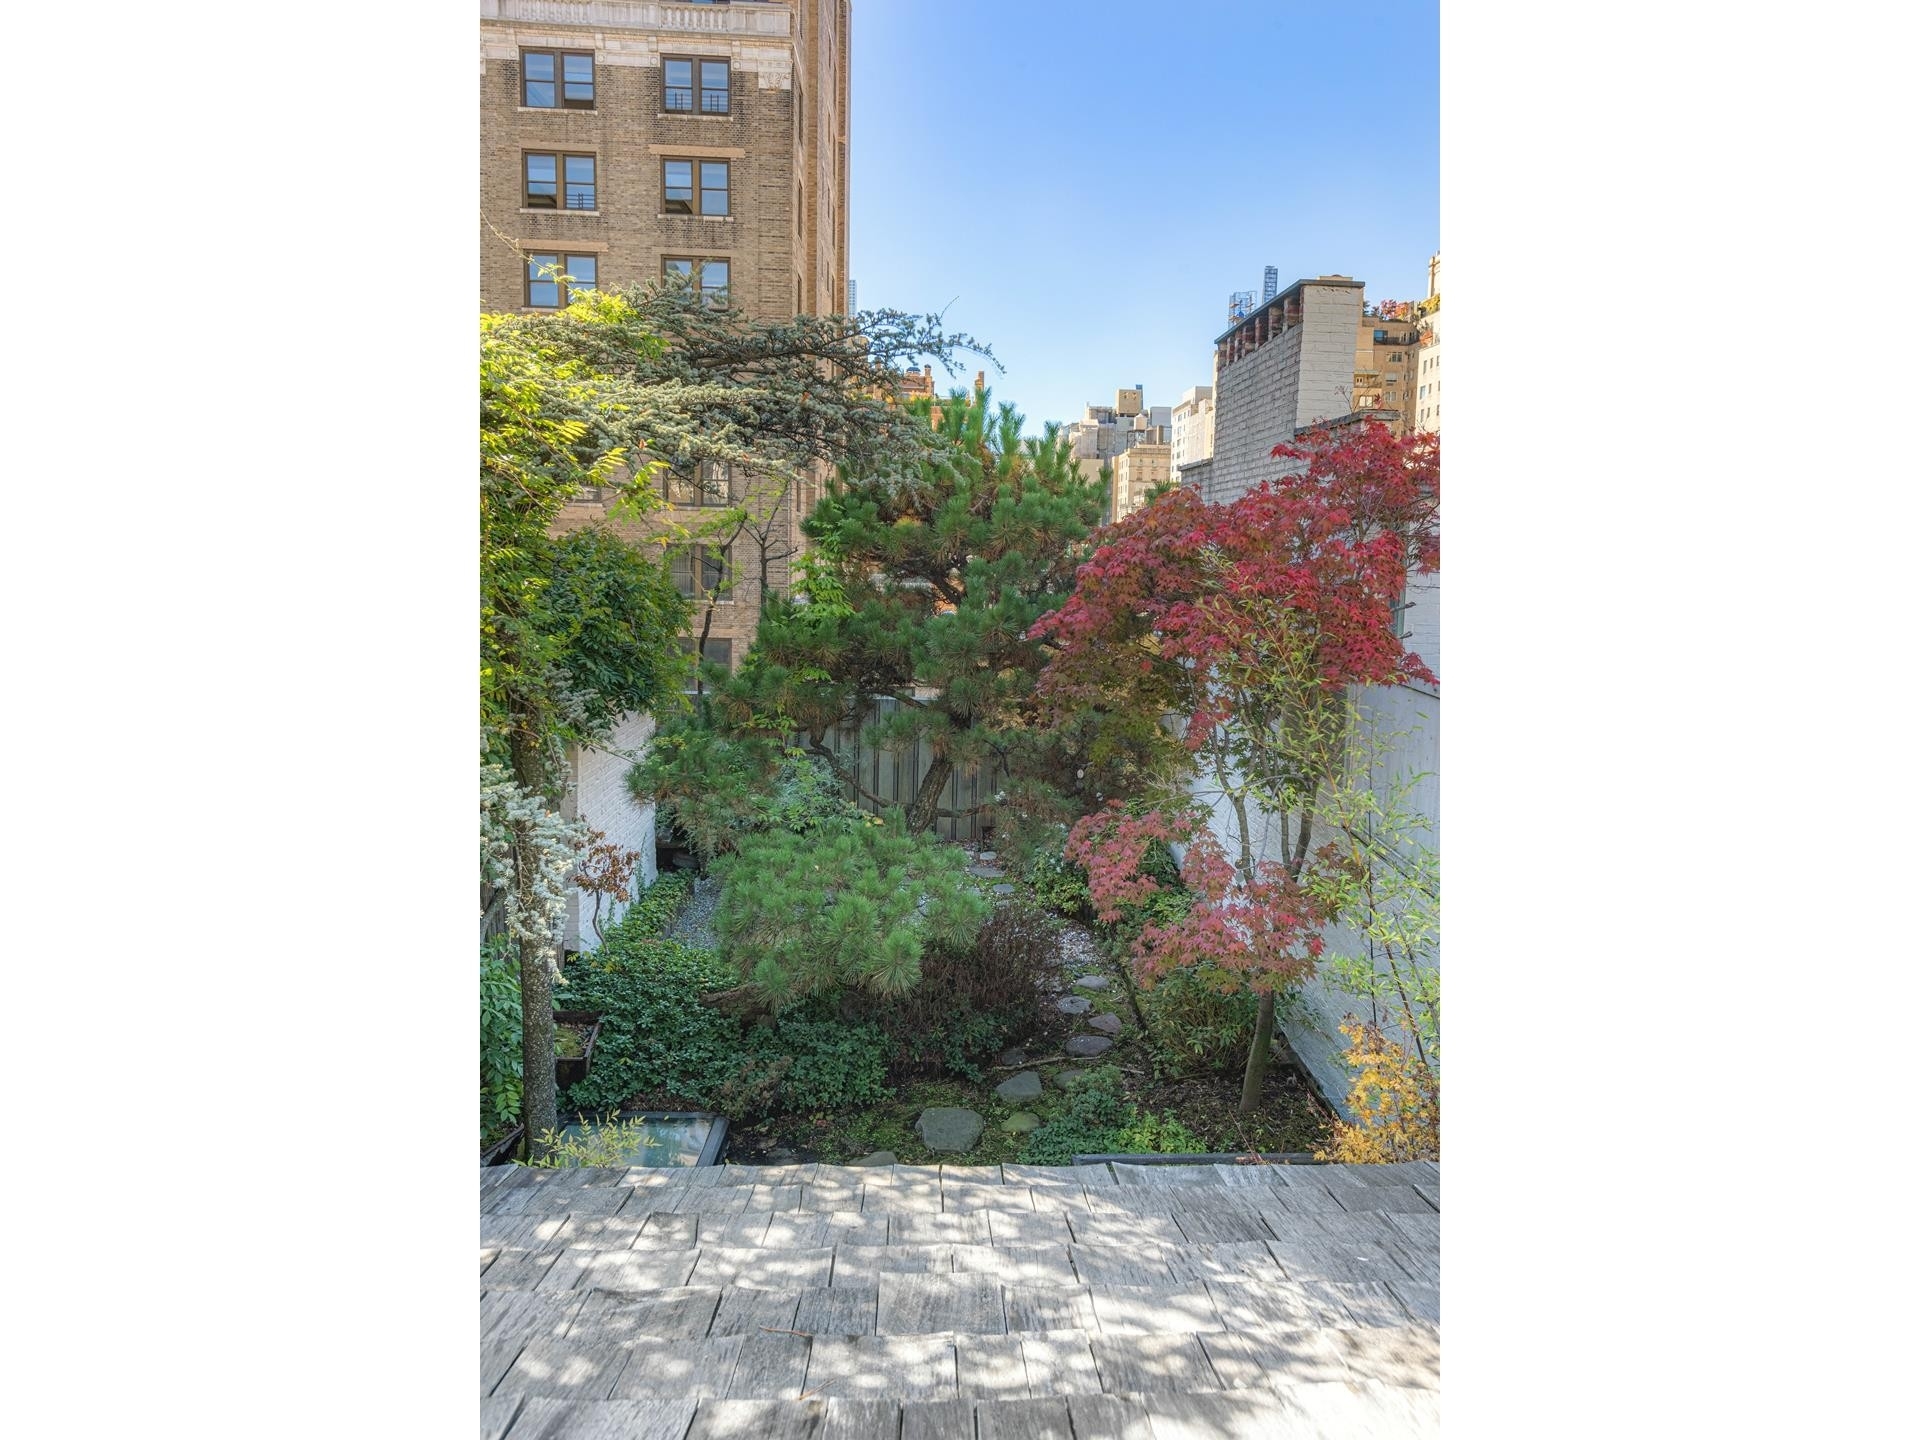 5. Single Family Townhouse for Sale at 17 E 76TH ST, TOWNHOUSE Lenox Hill, New York, New York 10021